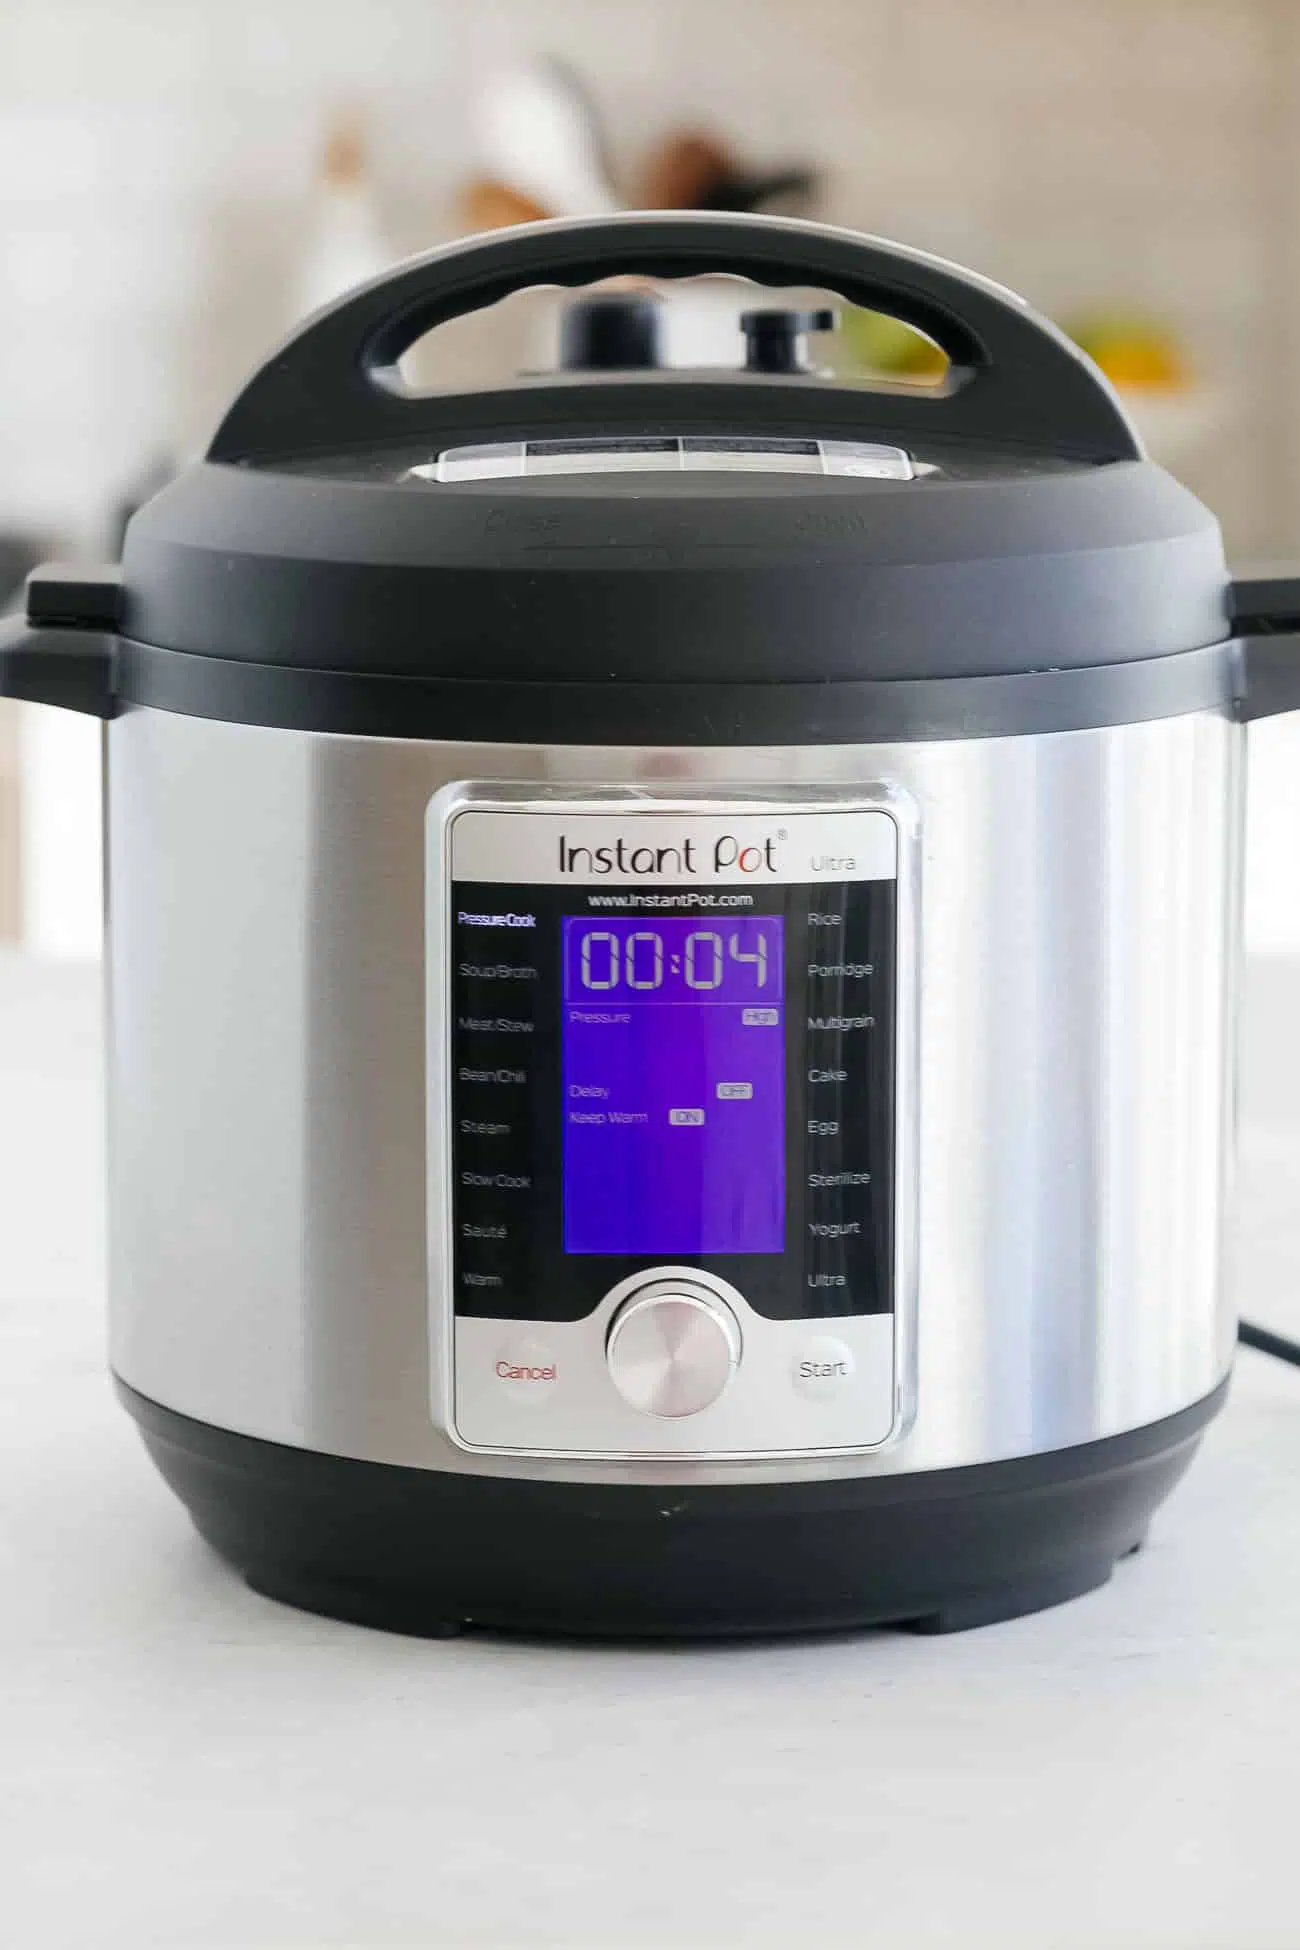 Instant Pot set to pressure cook for four minutes.